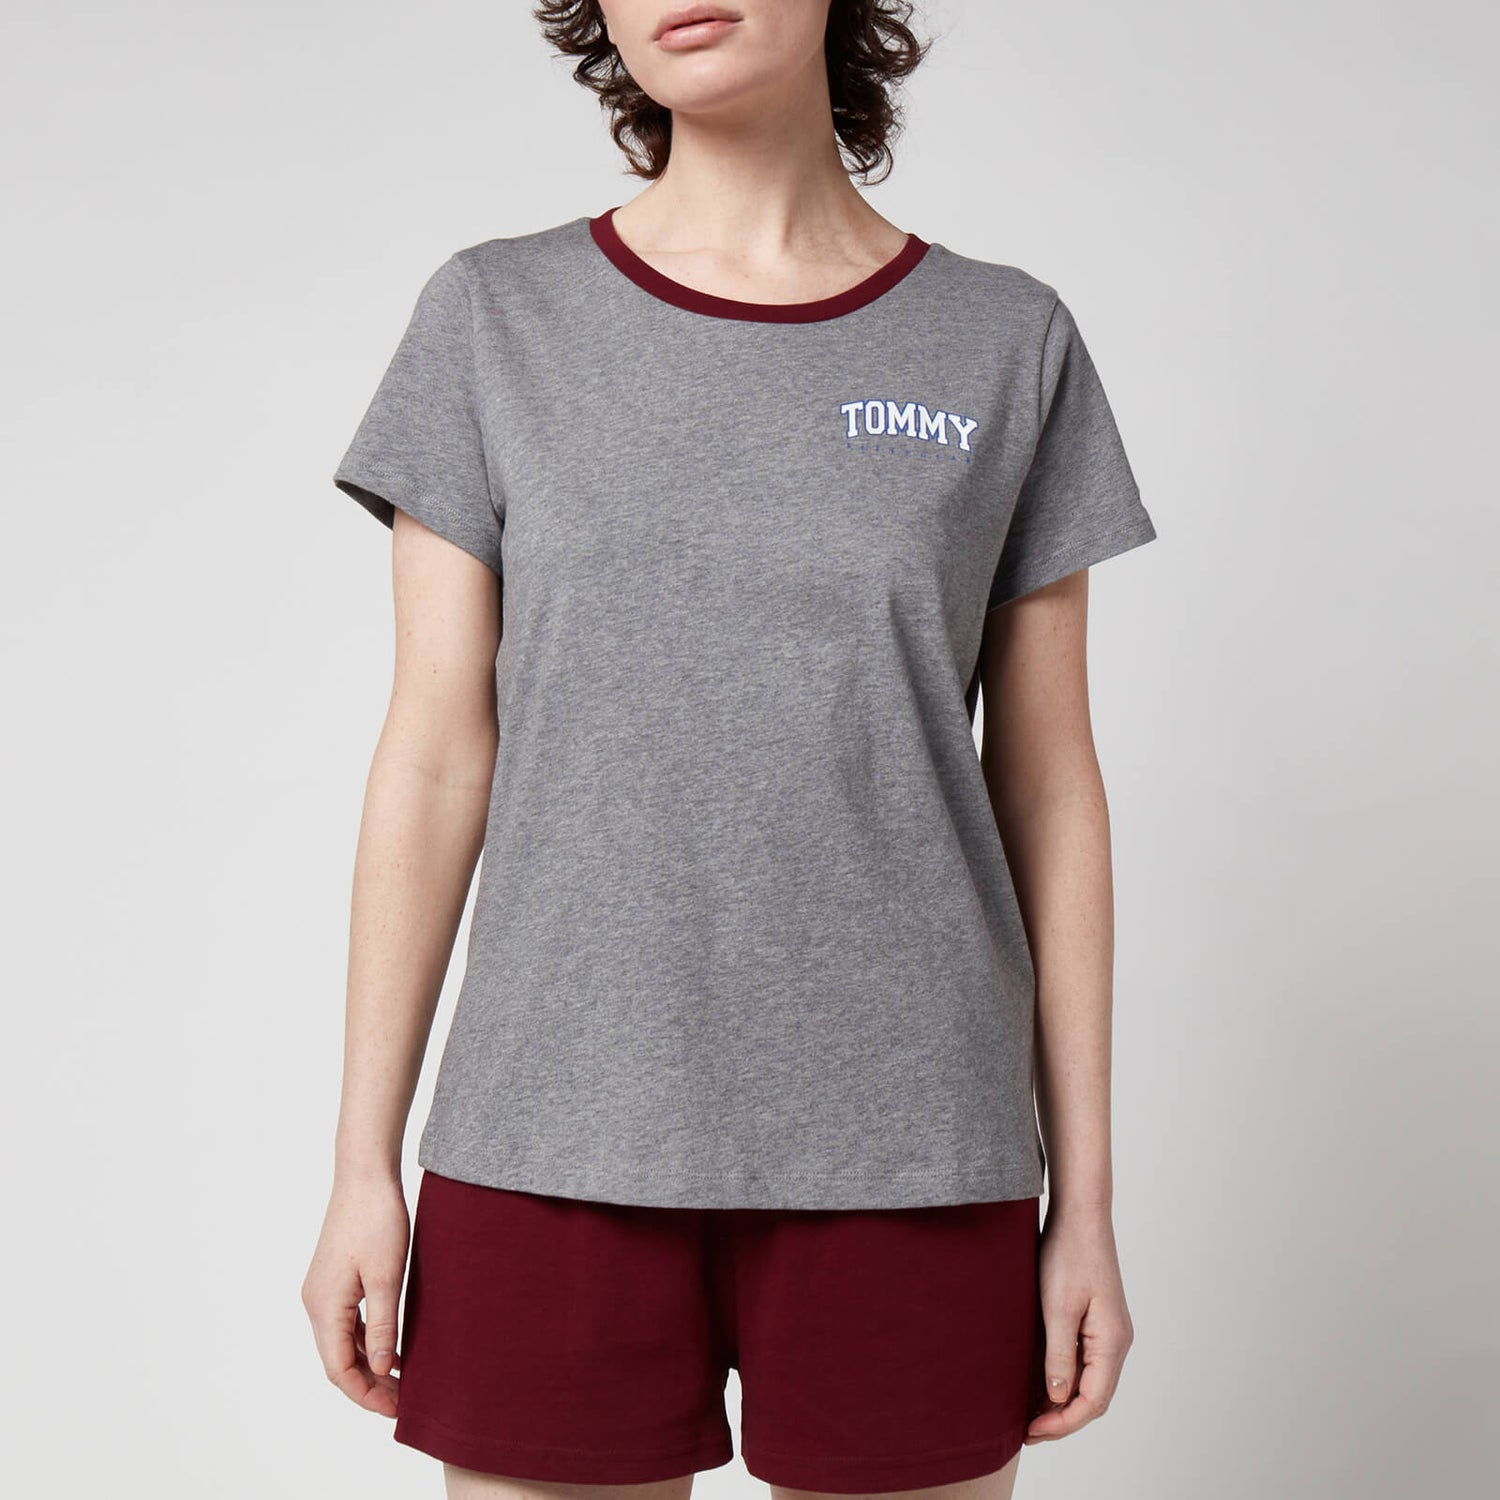 Tommy Hilfiger Women's Sustainable T-Shirt And Shorts Set - Medium Grey HT/Deep Rouge - XS